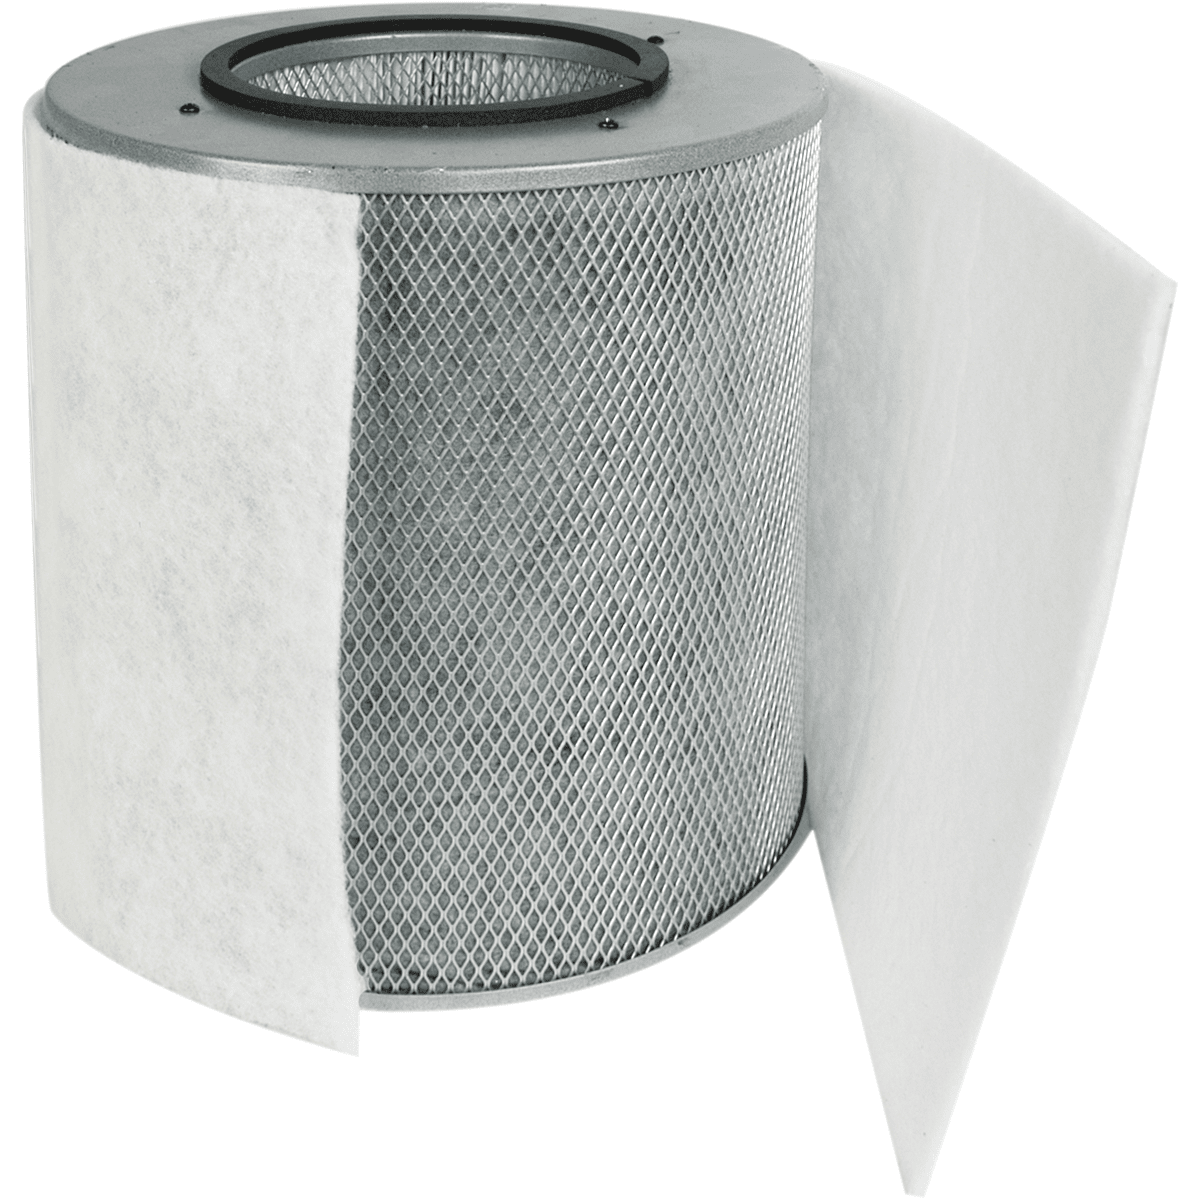 Austin Air Healthmate Plus Replacement Filter w/ Prefilter (Light-colored)